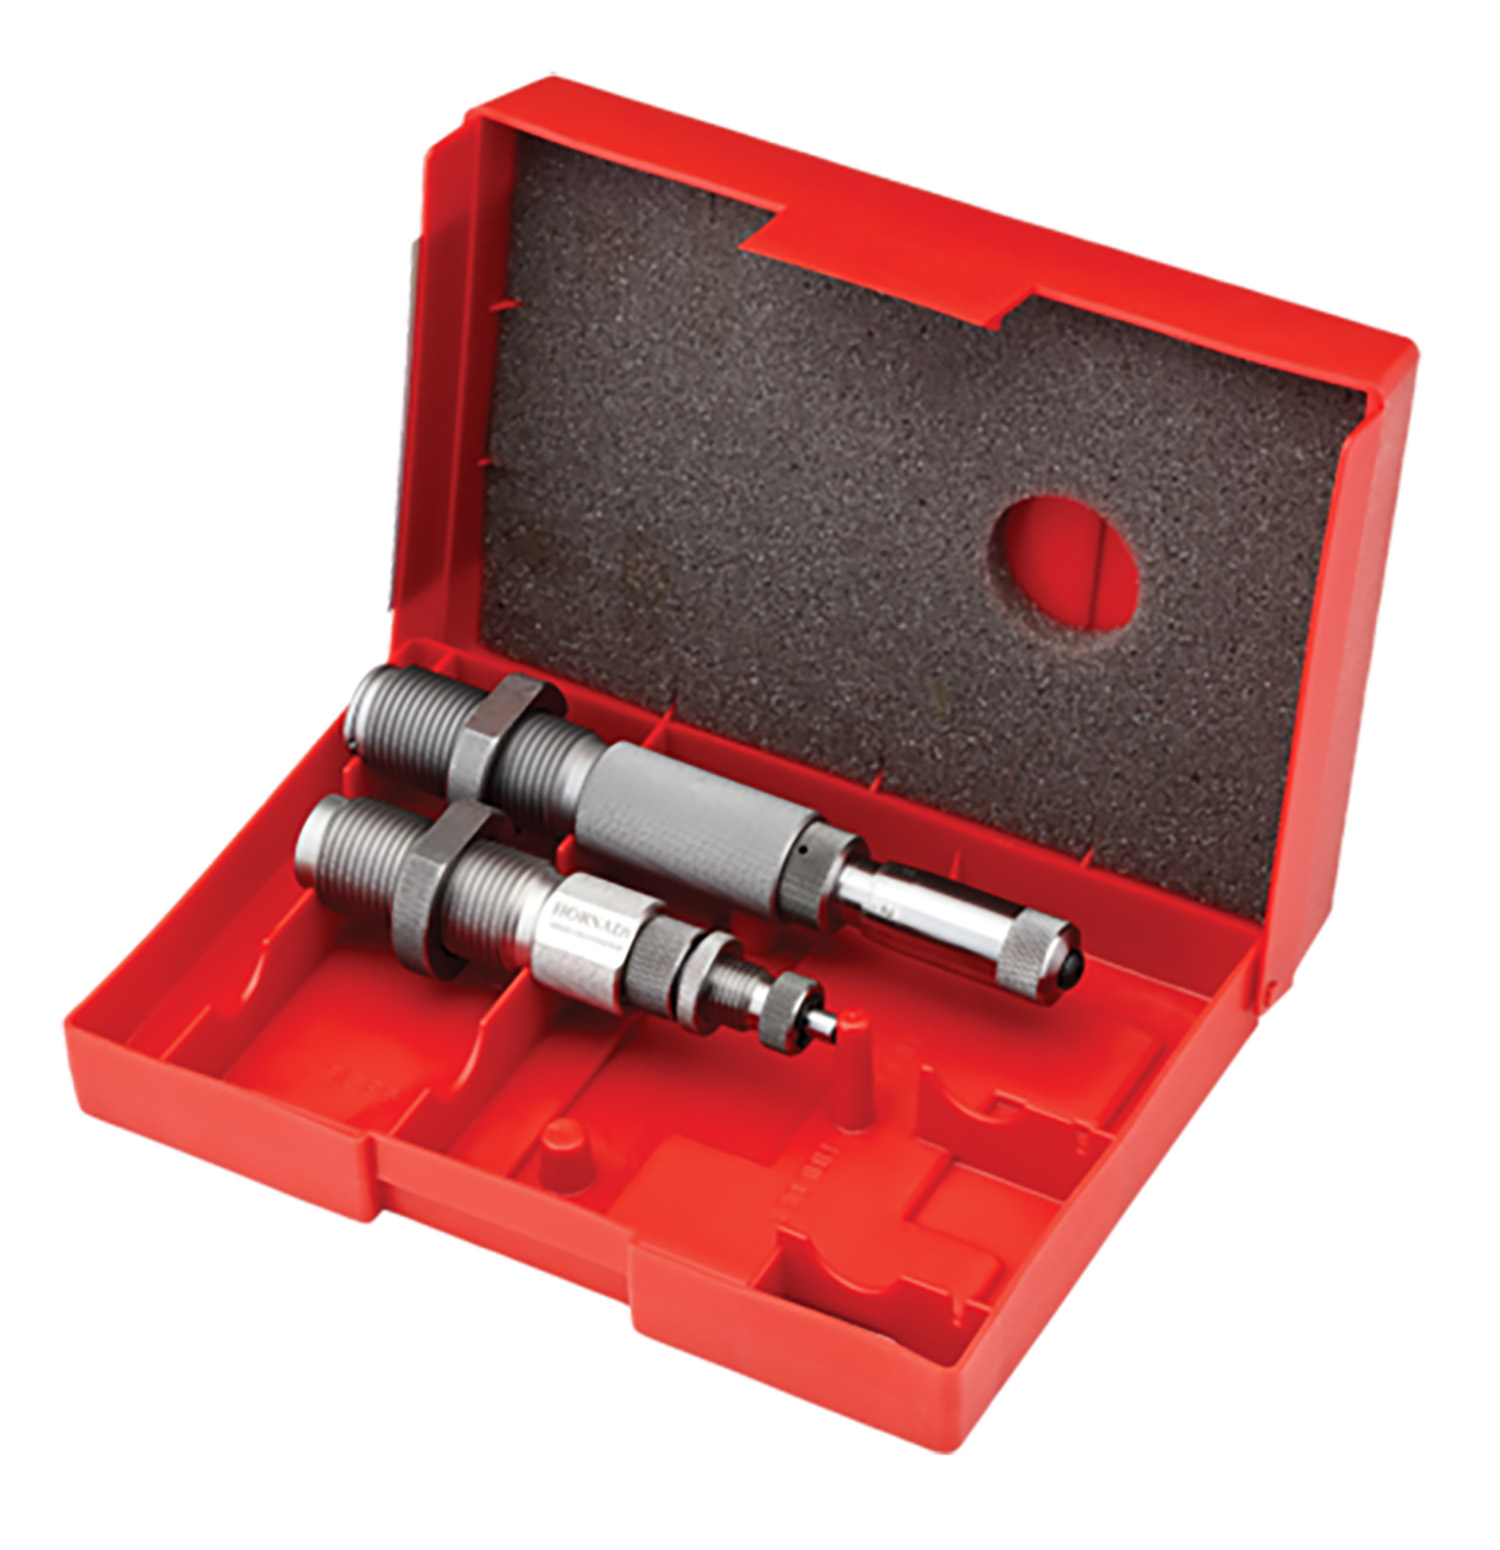 Hornady 544257 Match Grade 2 Die Set for 6mm ARC Includes Bushing/Seater